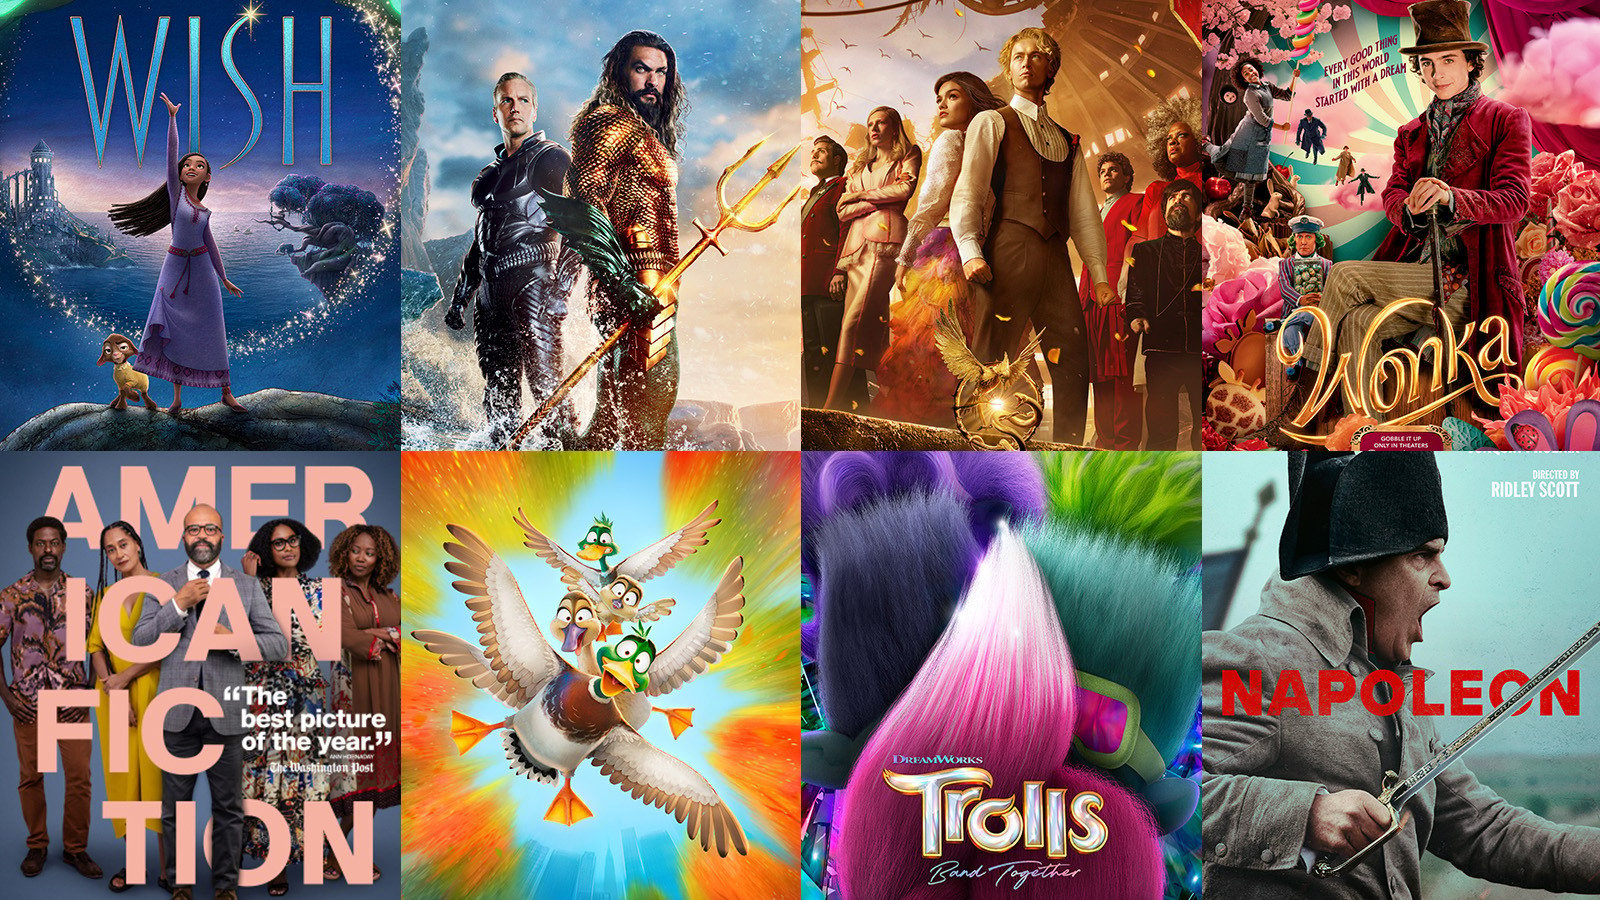 A mosaic of posters from 2023’s holiday movies, including ‘Wish,’ ‘Aquaman,’ ‘Wonka,’ ‘Napoleon,’ and ‘American Fiction.’